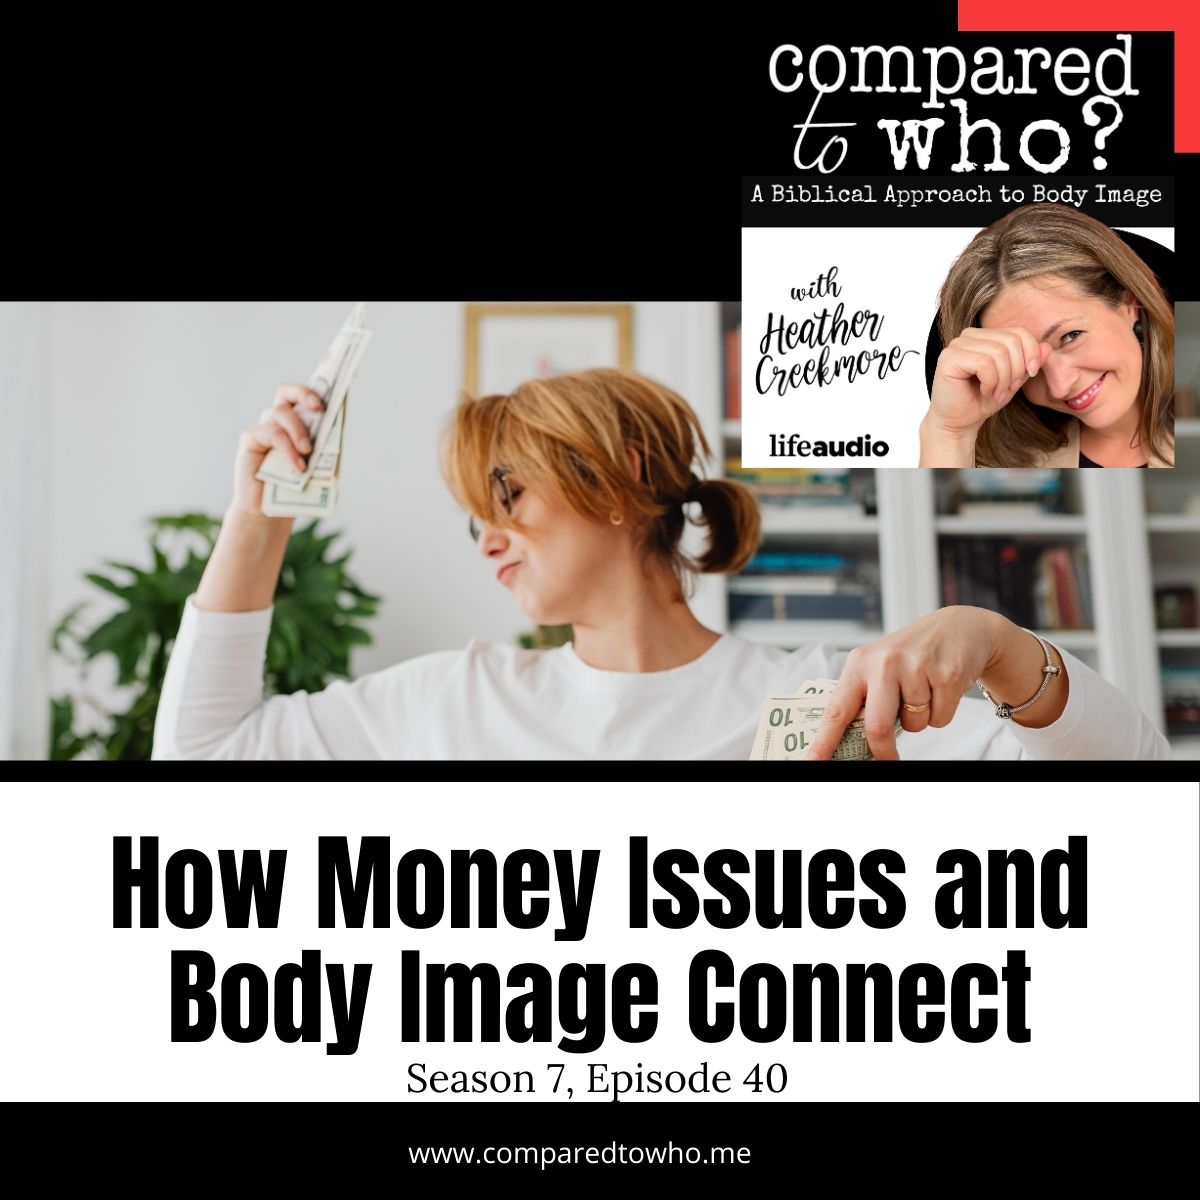 Money, Body Image, Stewardship, Hoarding, and All the Connections